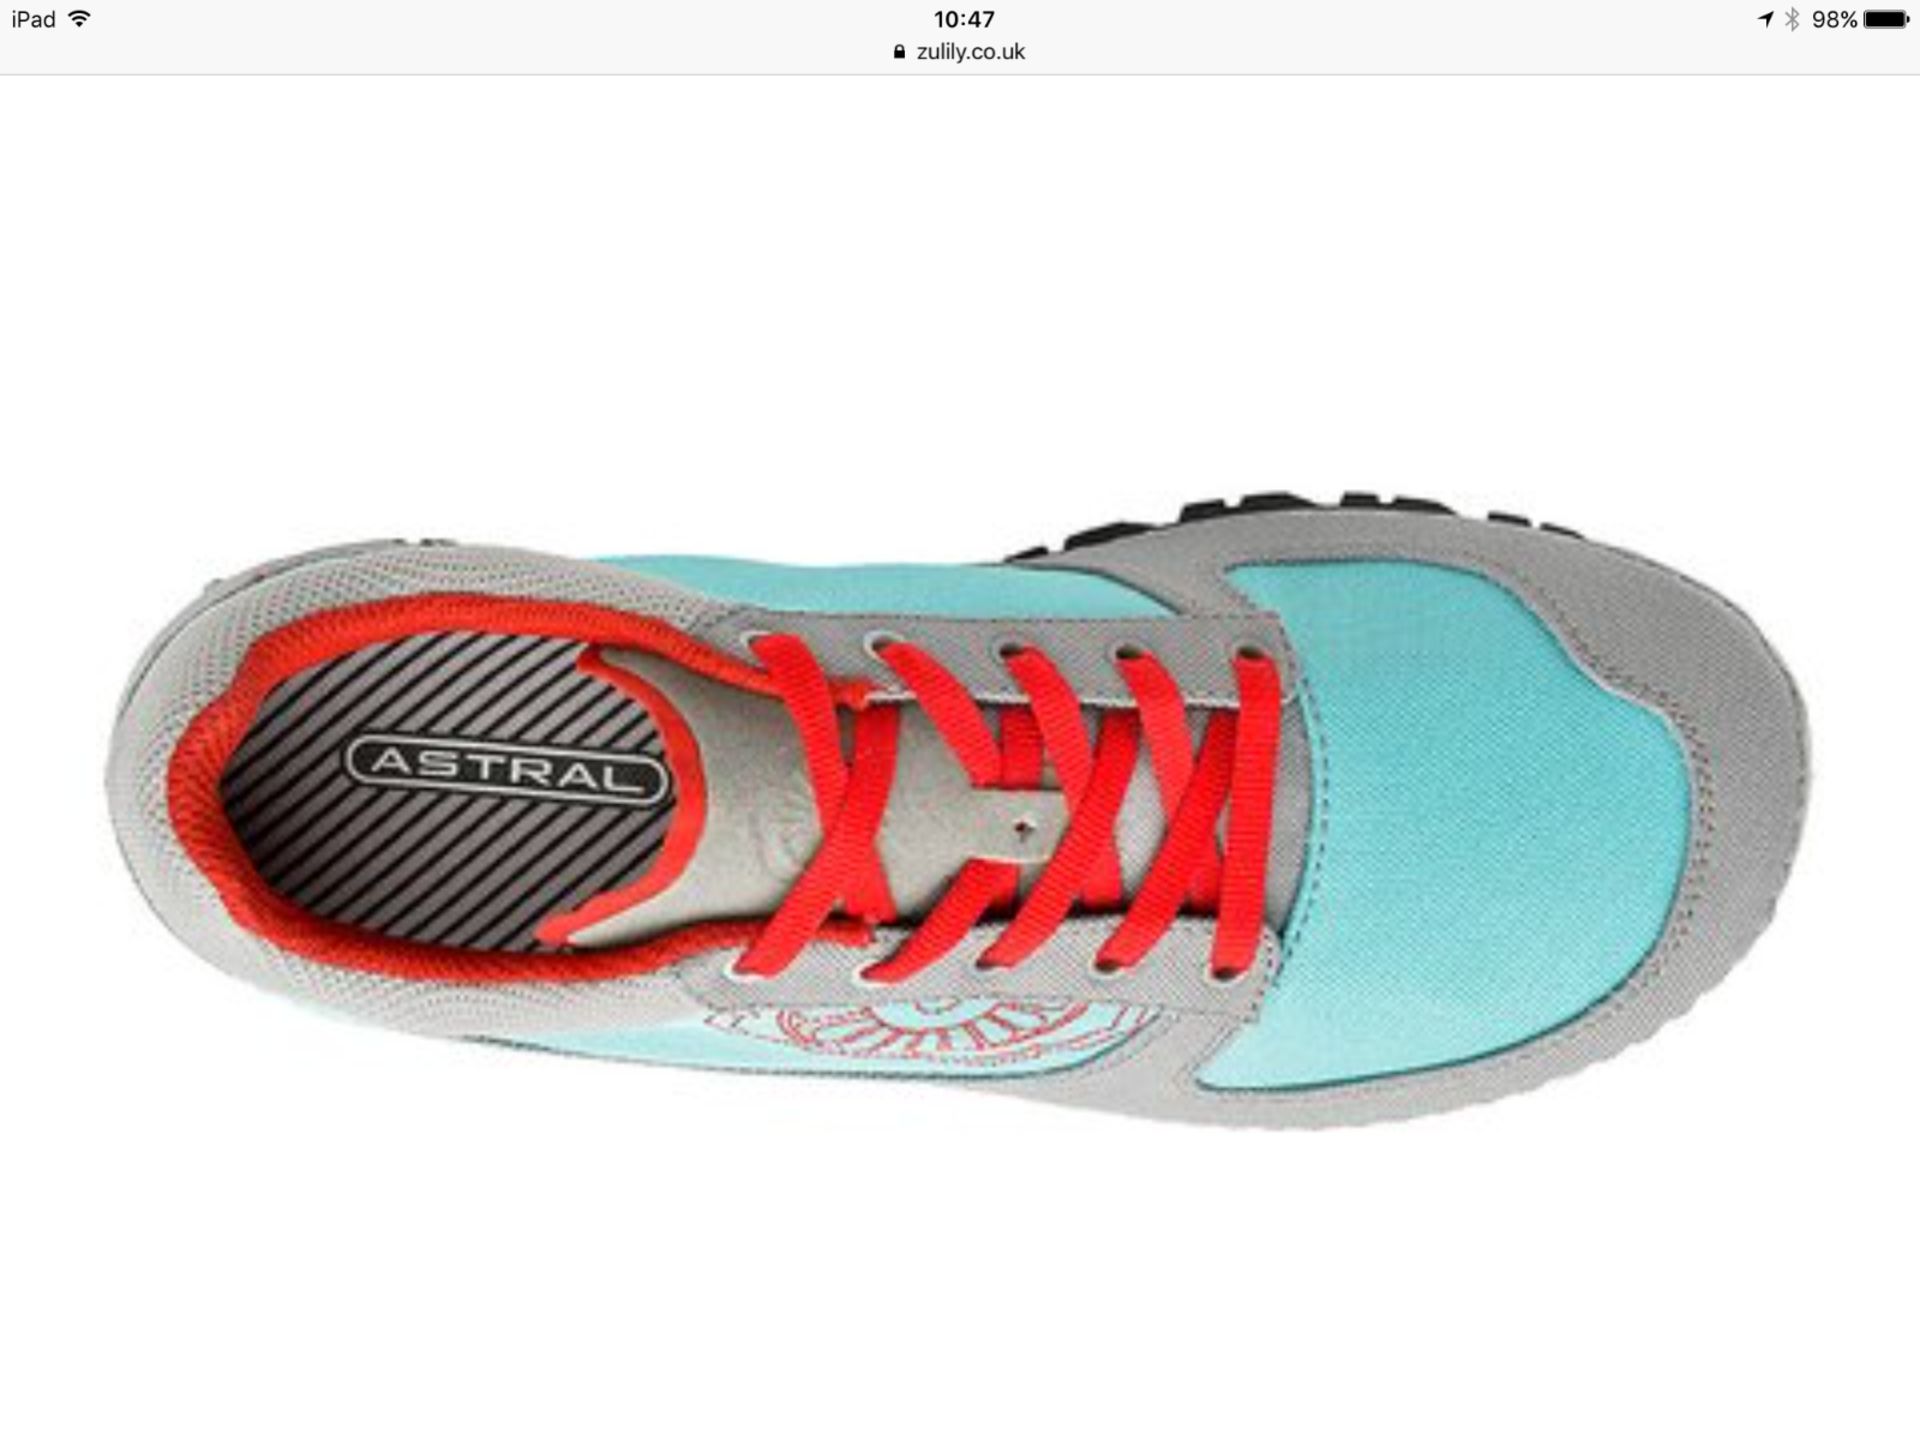 ASTRAL Turquoise & Granite Grey Tinker Sneaker, Size UK 8.5 (New with box) [Ref: 43759909] - Image 4 of 7